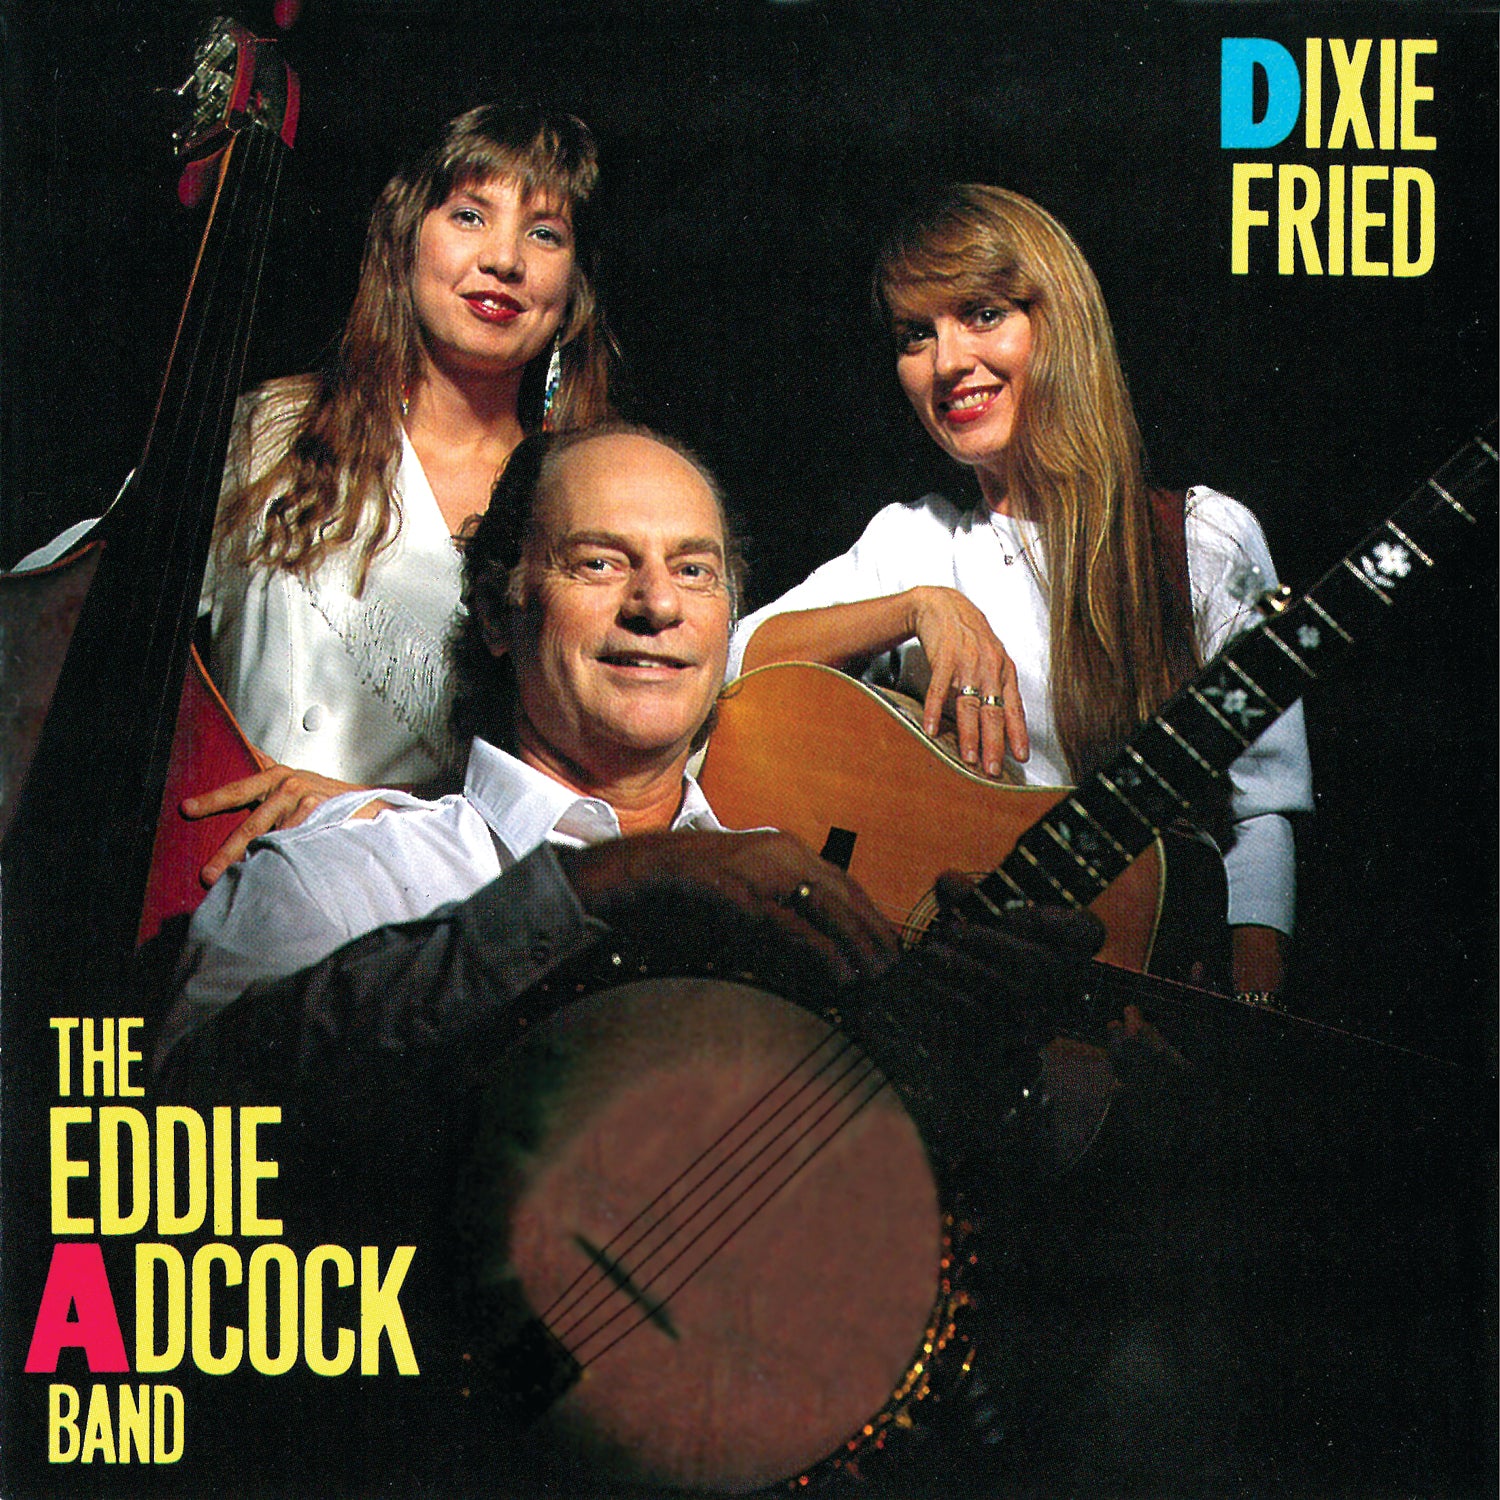 The Eddie Adcock Band - Dixie Fried - MP3